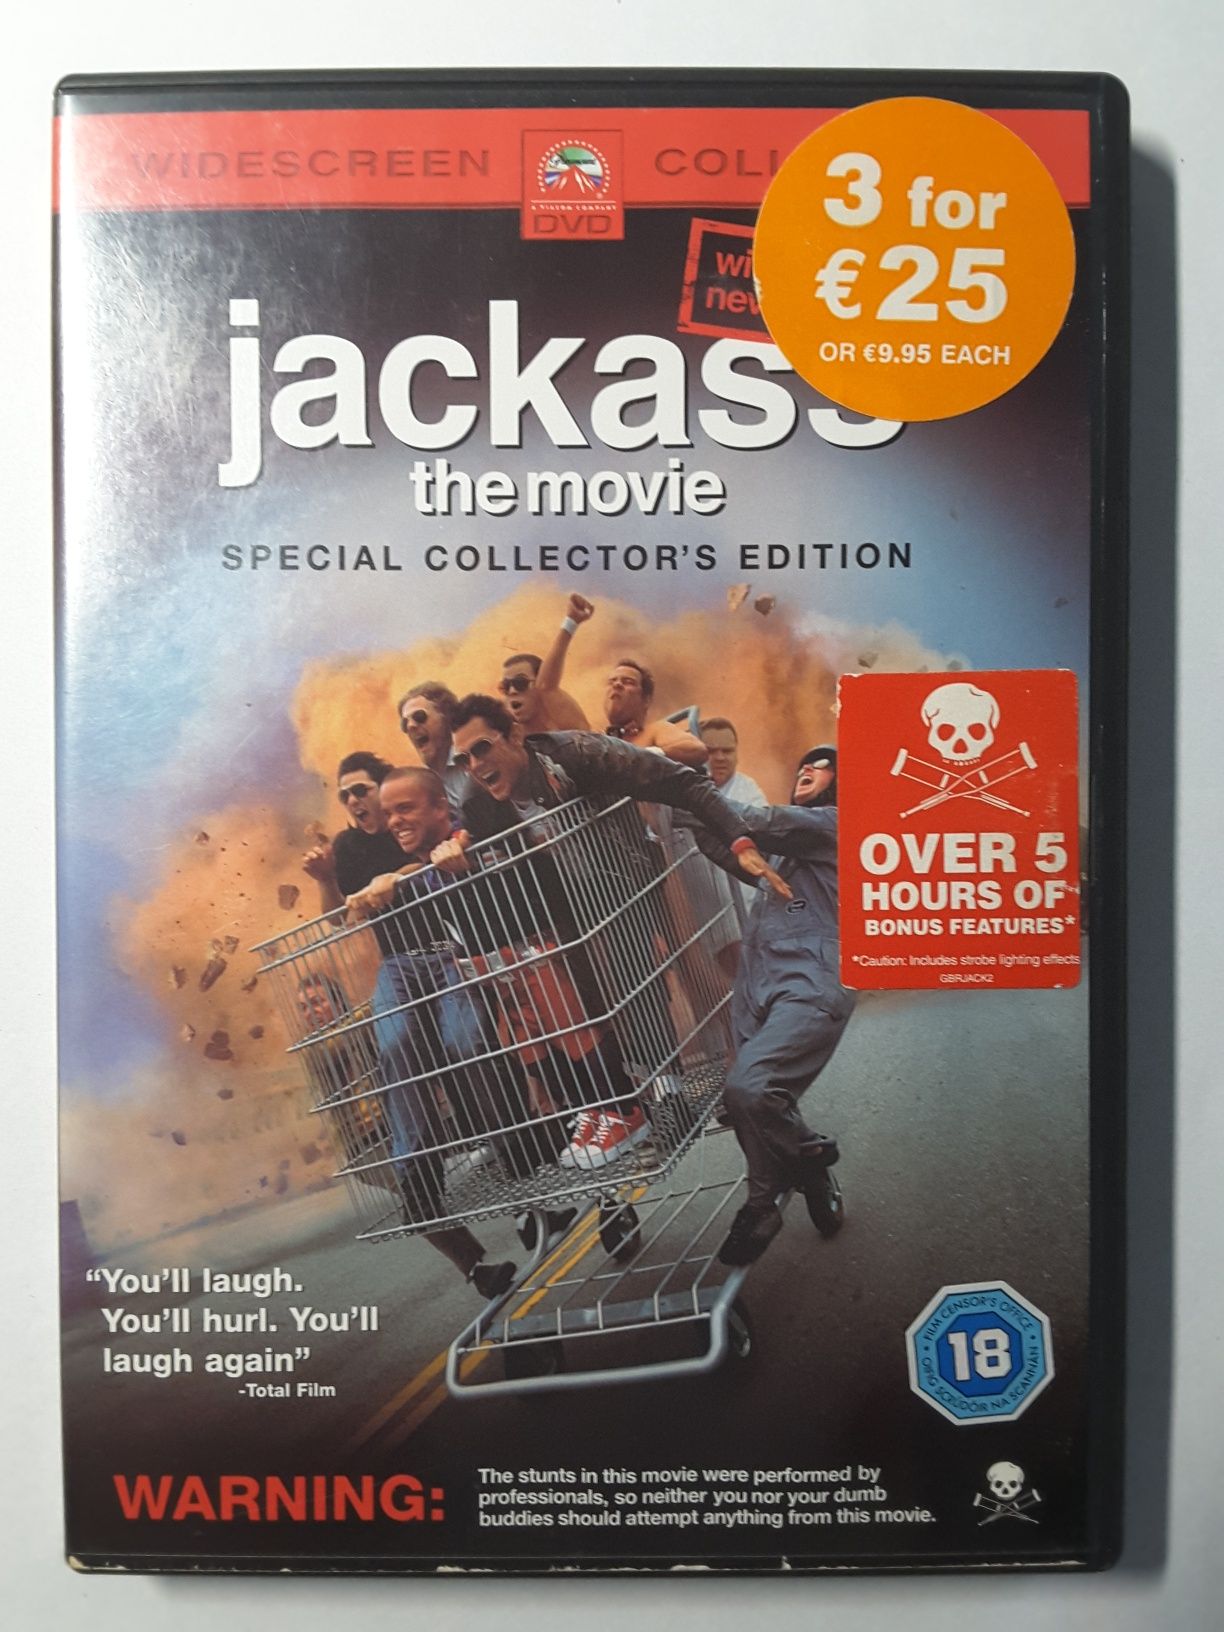 Jackass the movie Special Collector's Edition - DVD